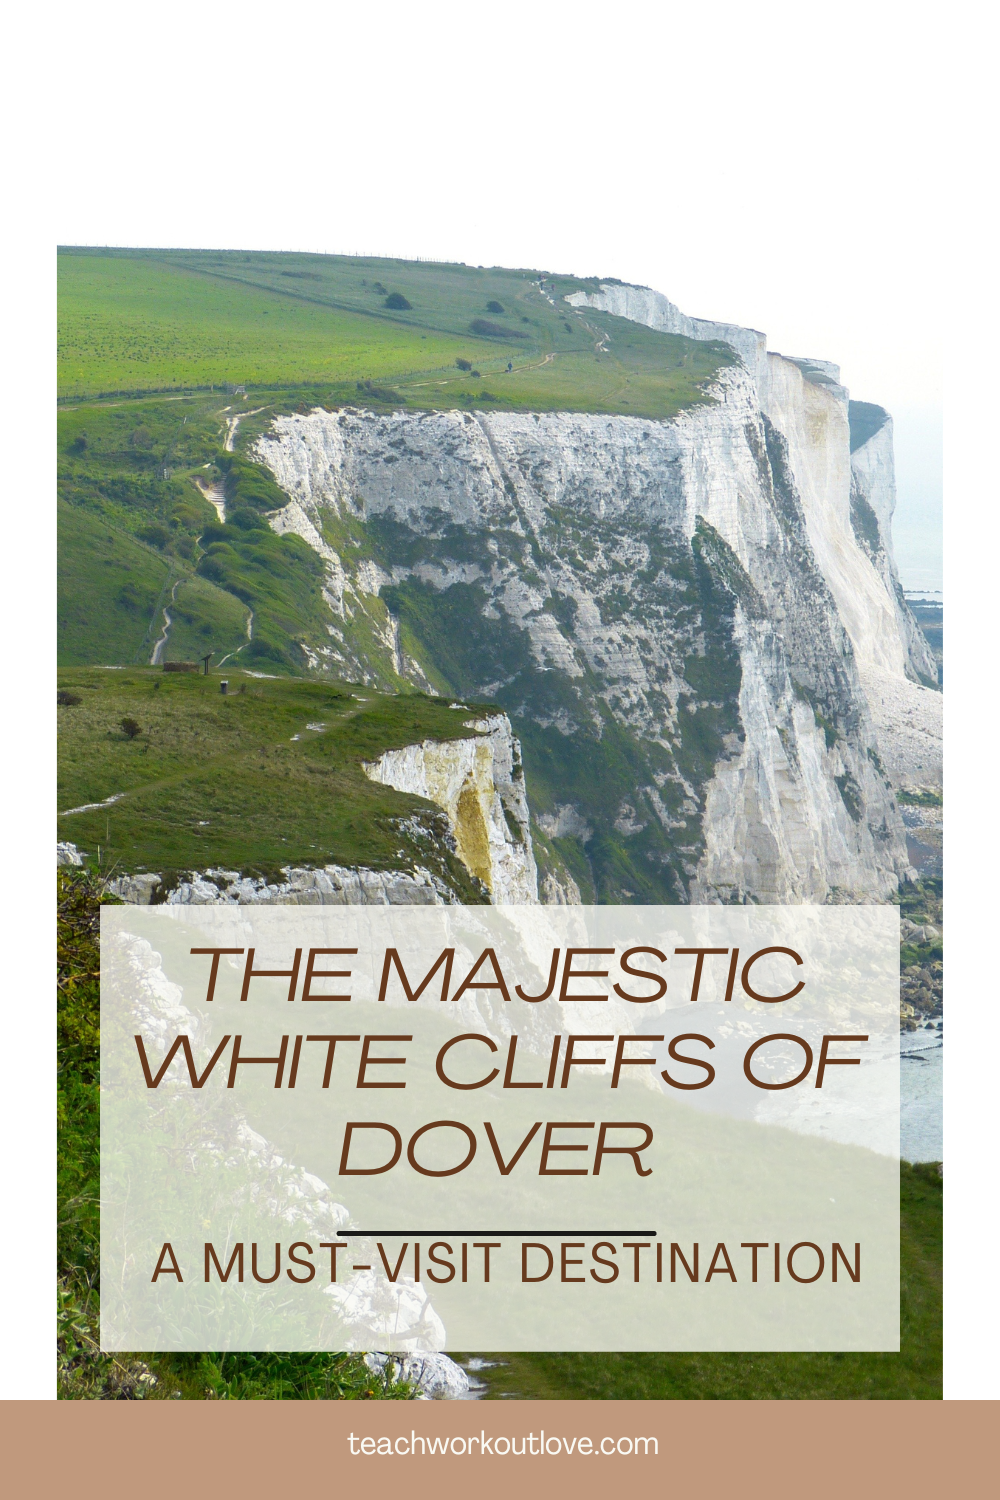 The iconic White Cliffs of Dover, standing tall and proud along the English Channel, have long been a symbol of Britain's defiant spirit. With their chalk-white façade stretching out for miles, they offer a dramatic backdrop to one of the UK's most enchanting coastal regions.